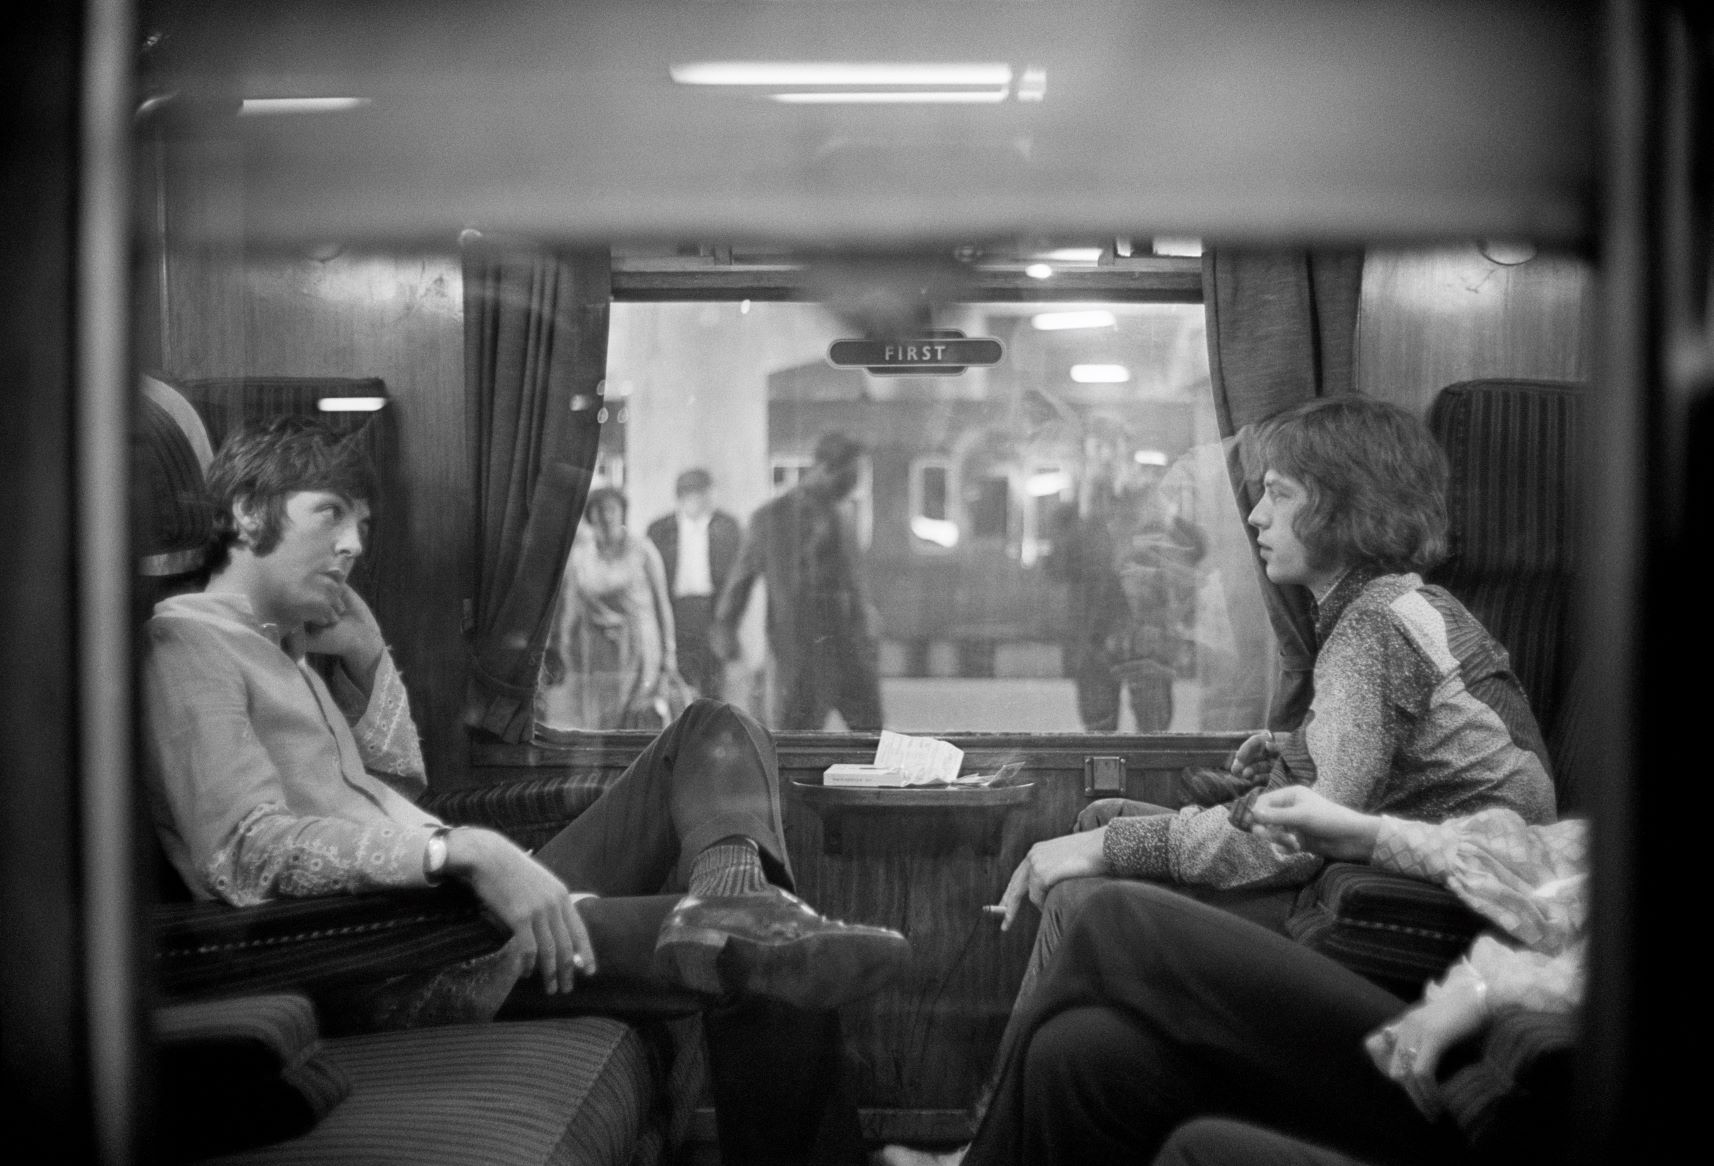 The Beatles' Paul McCartney and The Rolling Stones' Mick Jagger on a train